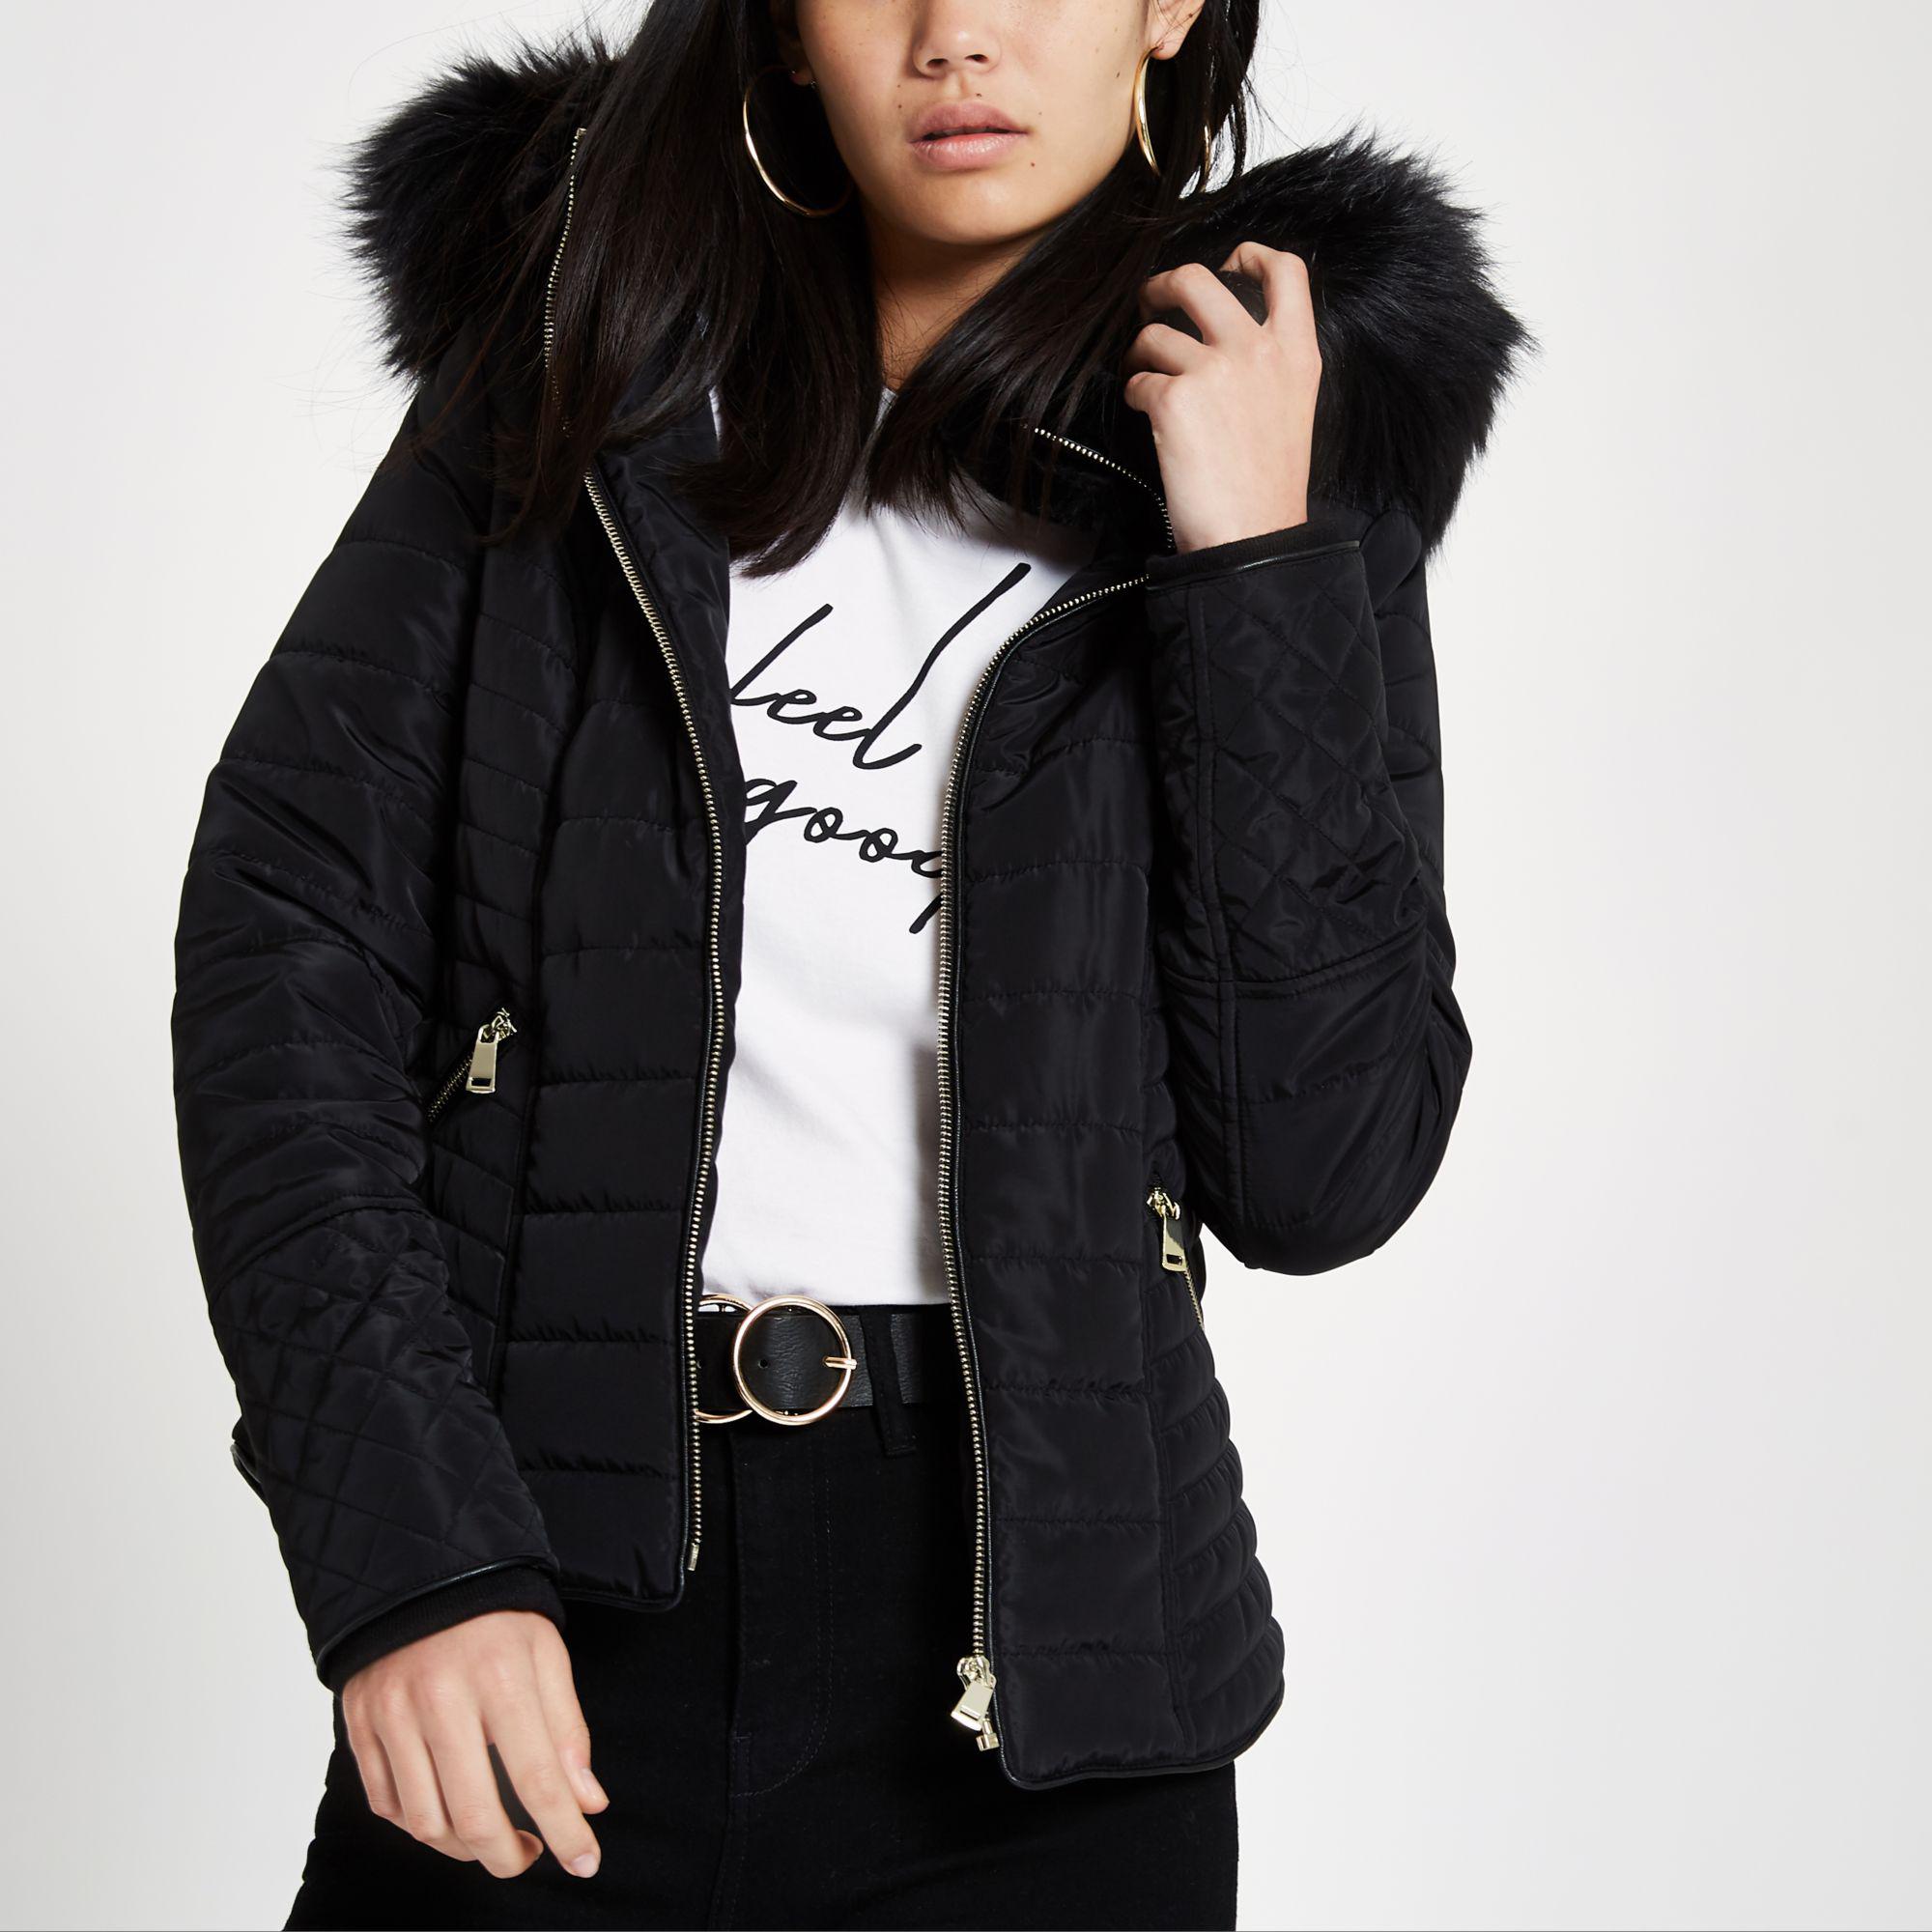 river island black jackets,Free delivery,zwh.com.pk